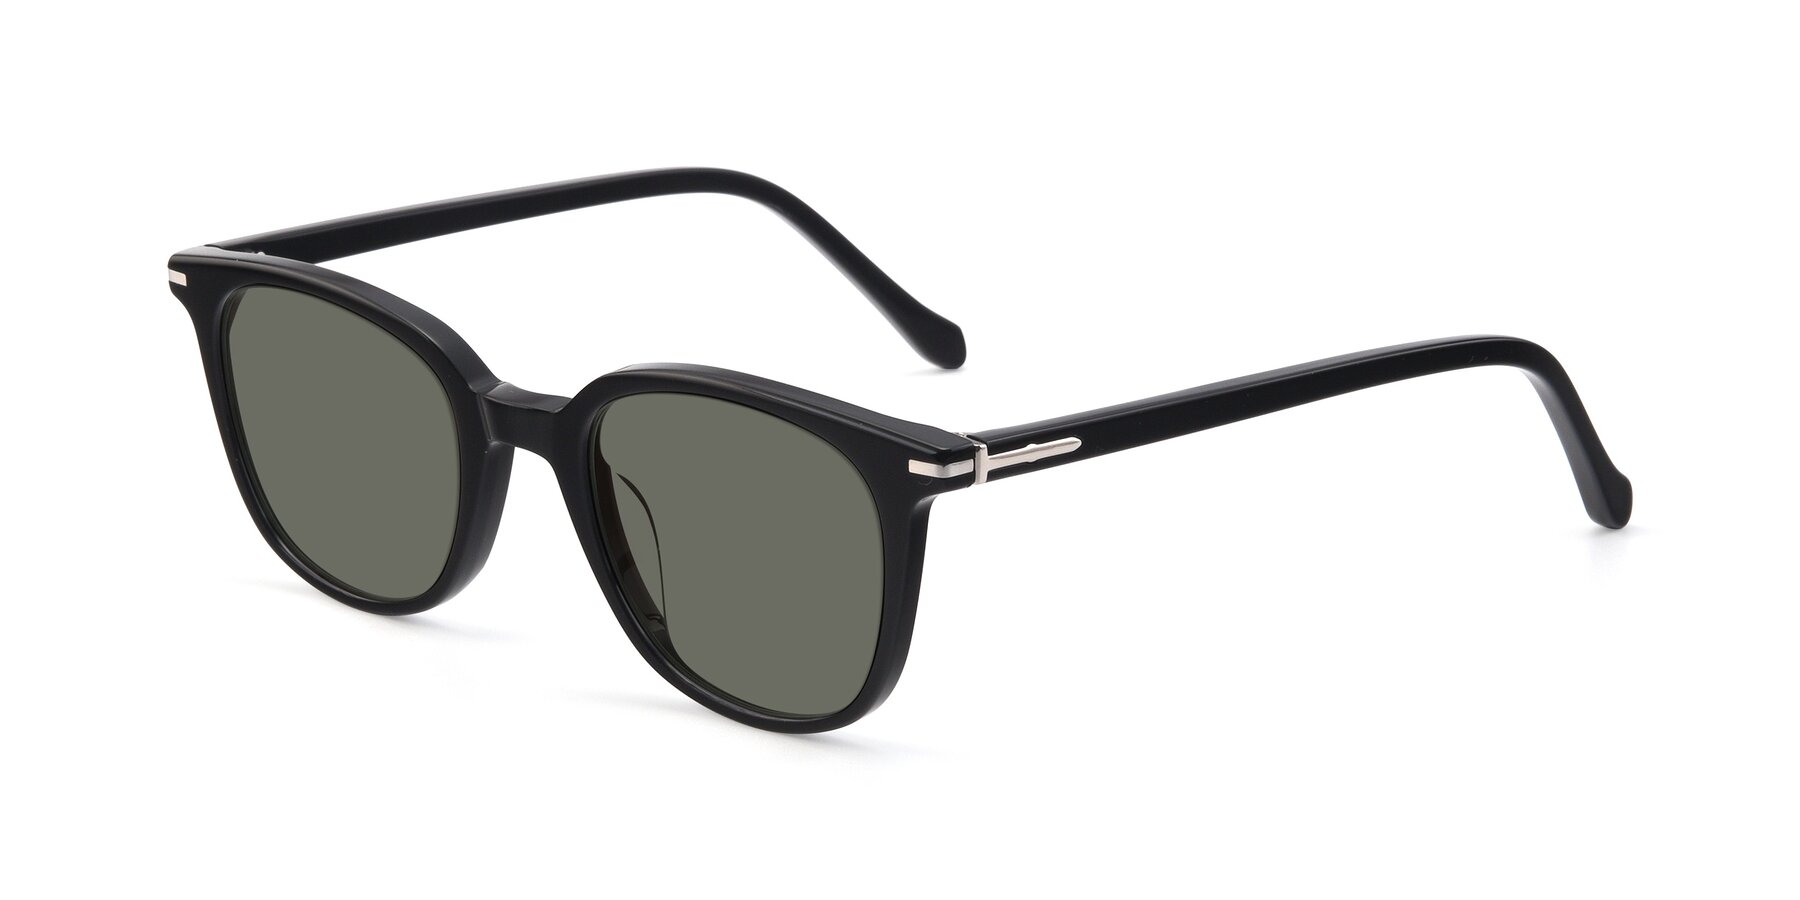 Angle of 17562 in Black with Gray Polarized Lenses